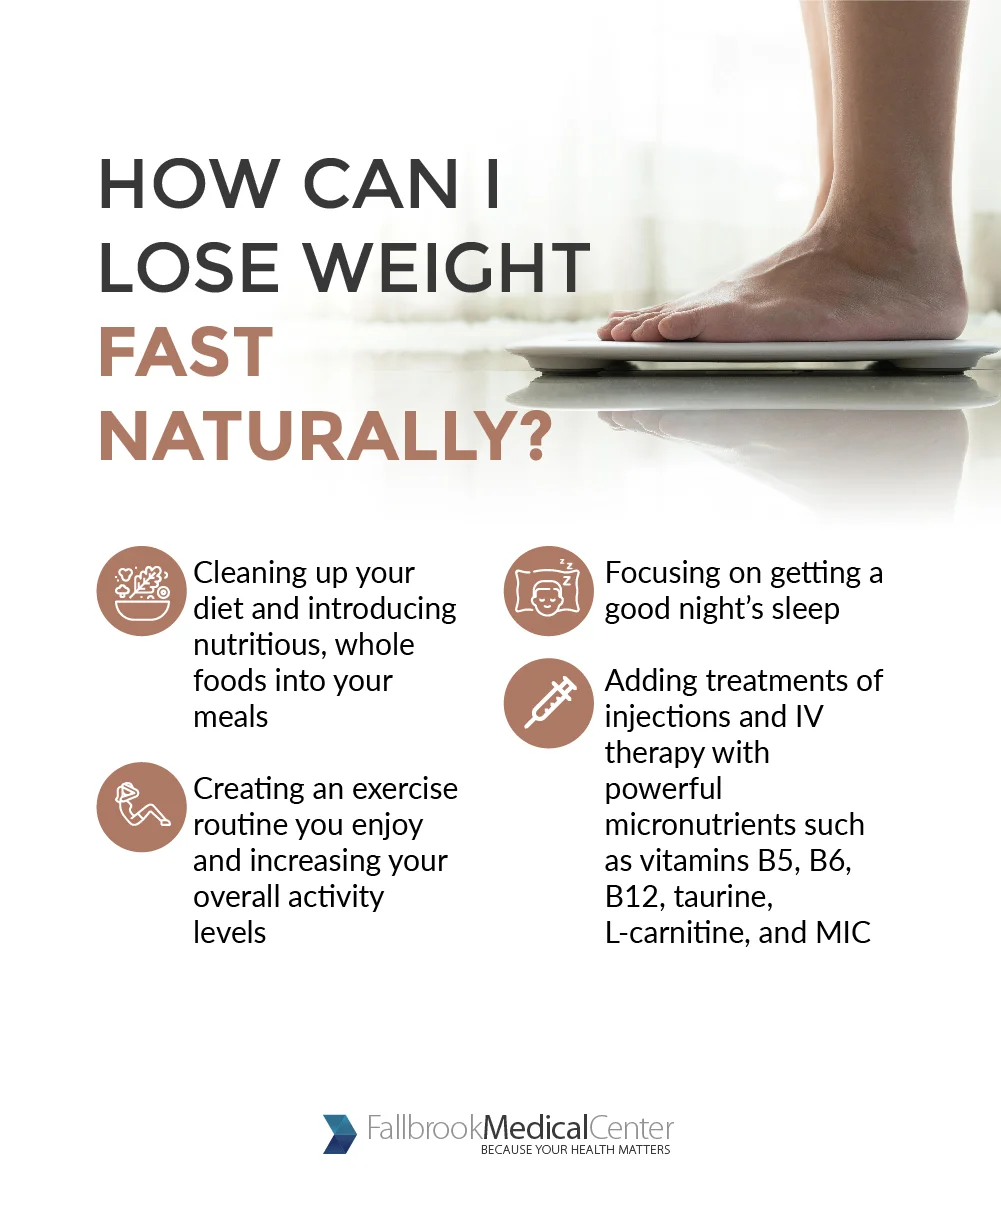 How Can I Lose Weight Fast Naturally?